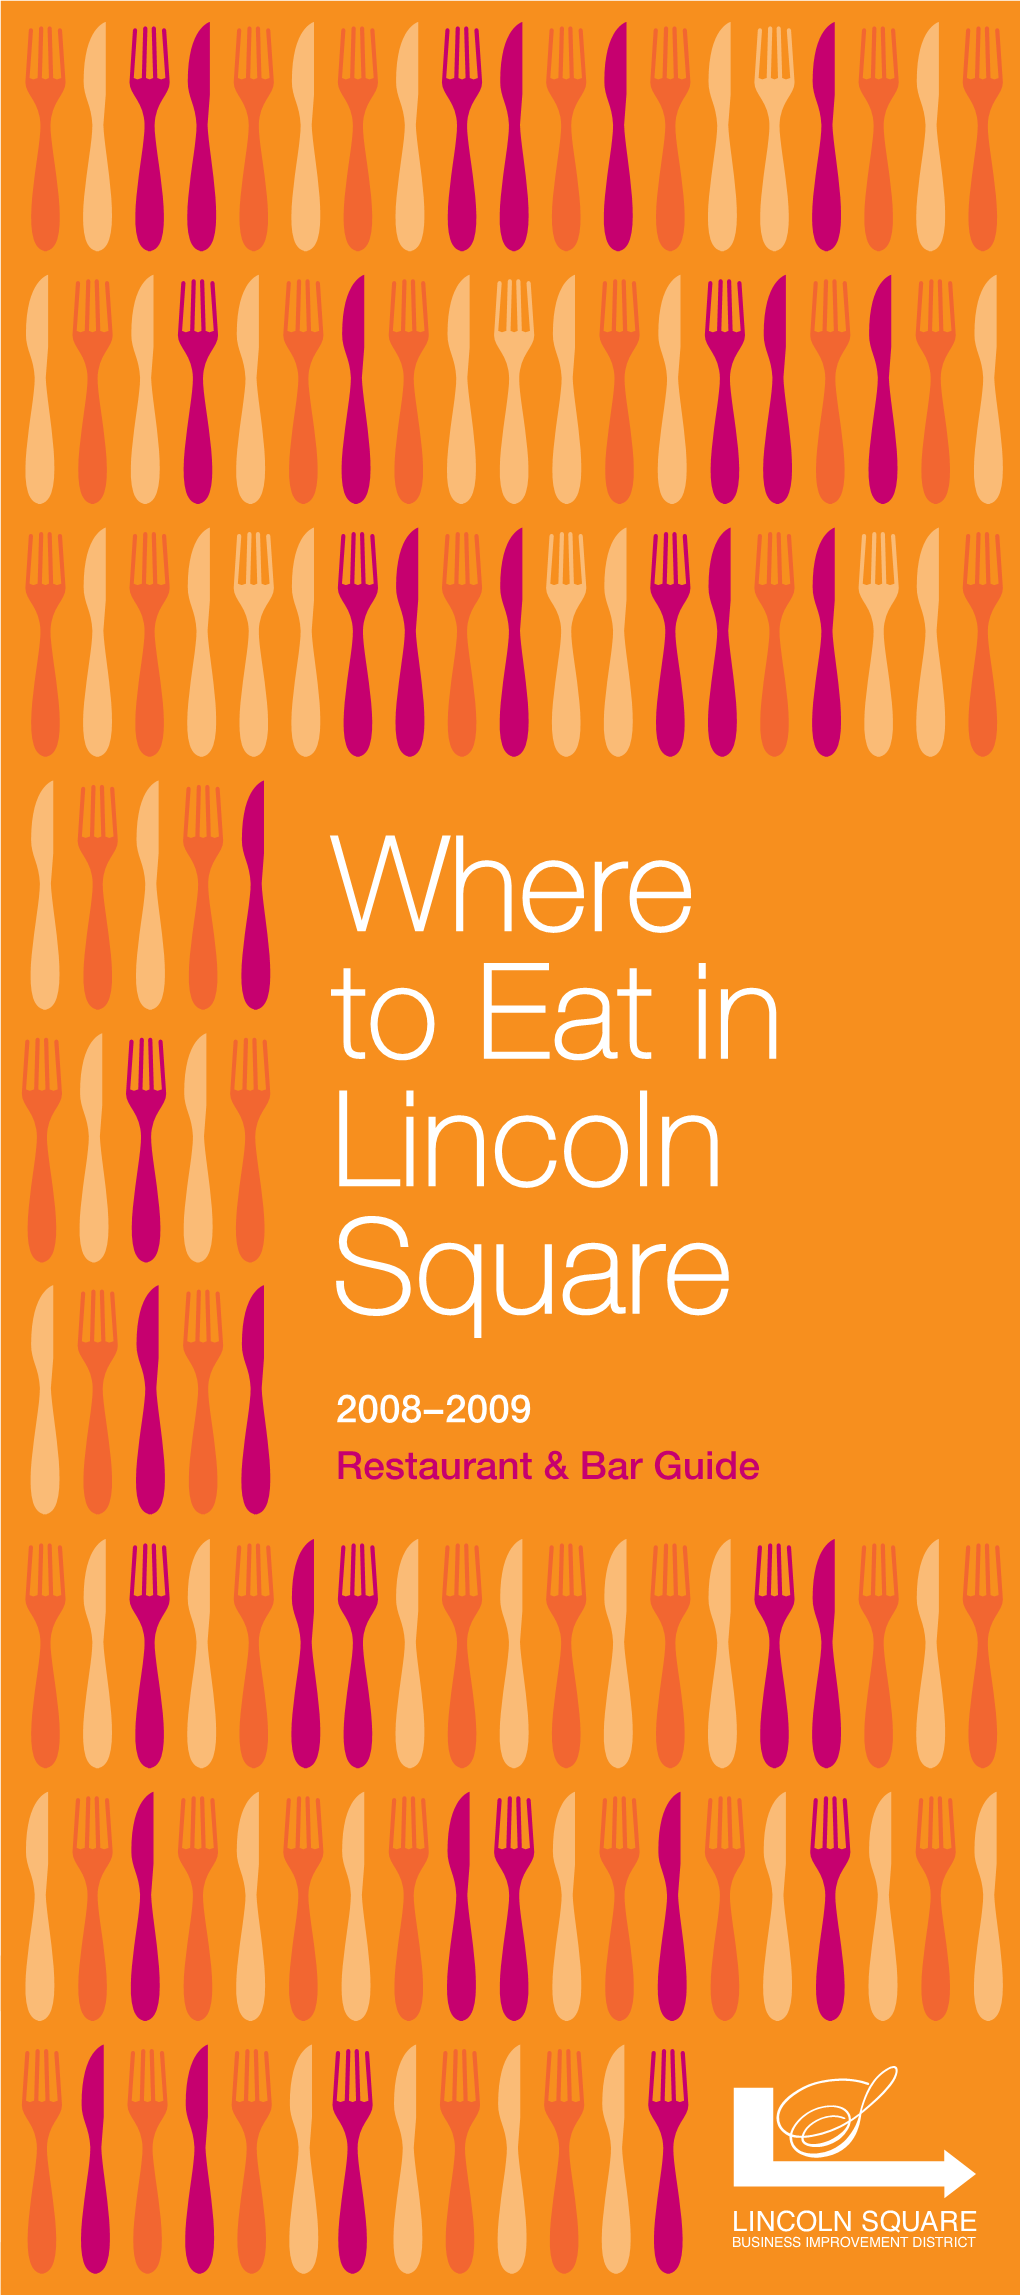 Where to Eat in Lincoln Square